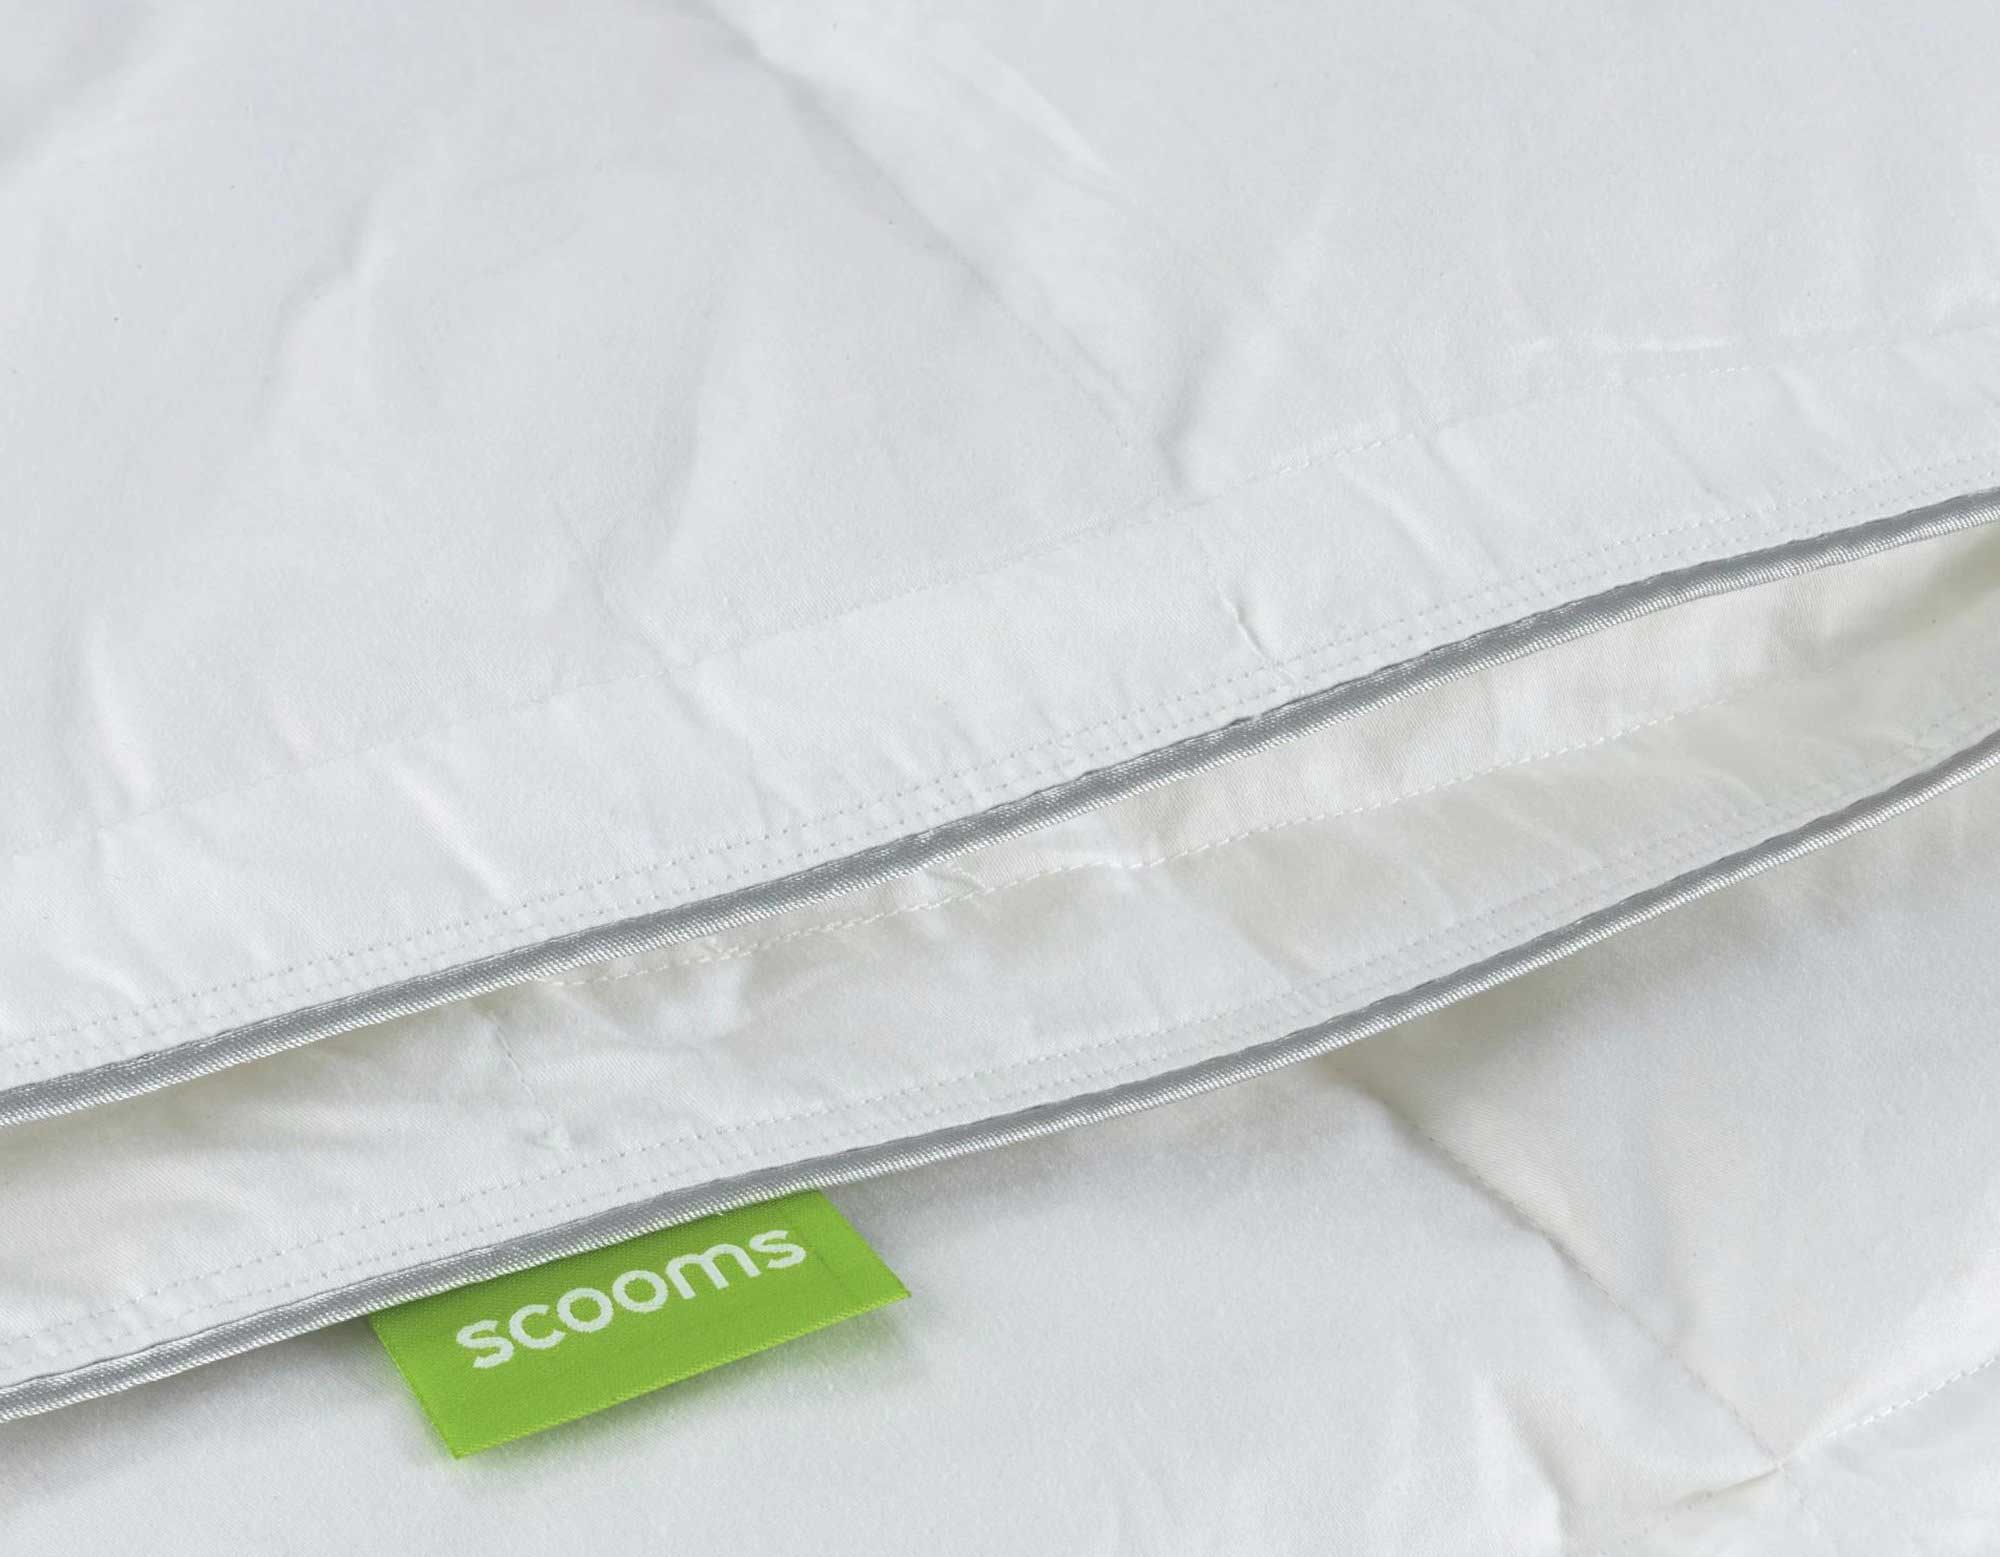 Double 4.5 tog goose down duvet edging detail and scooms brand label